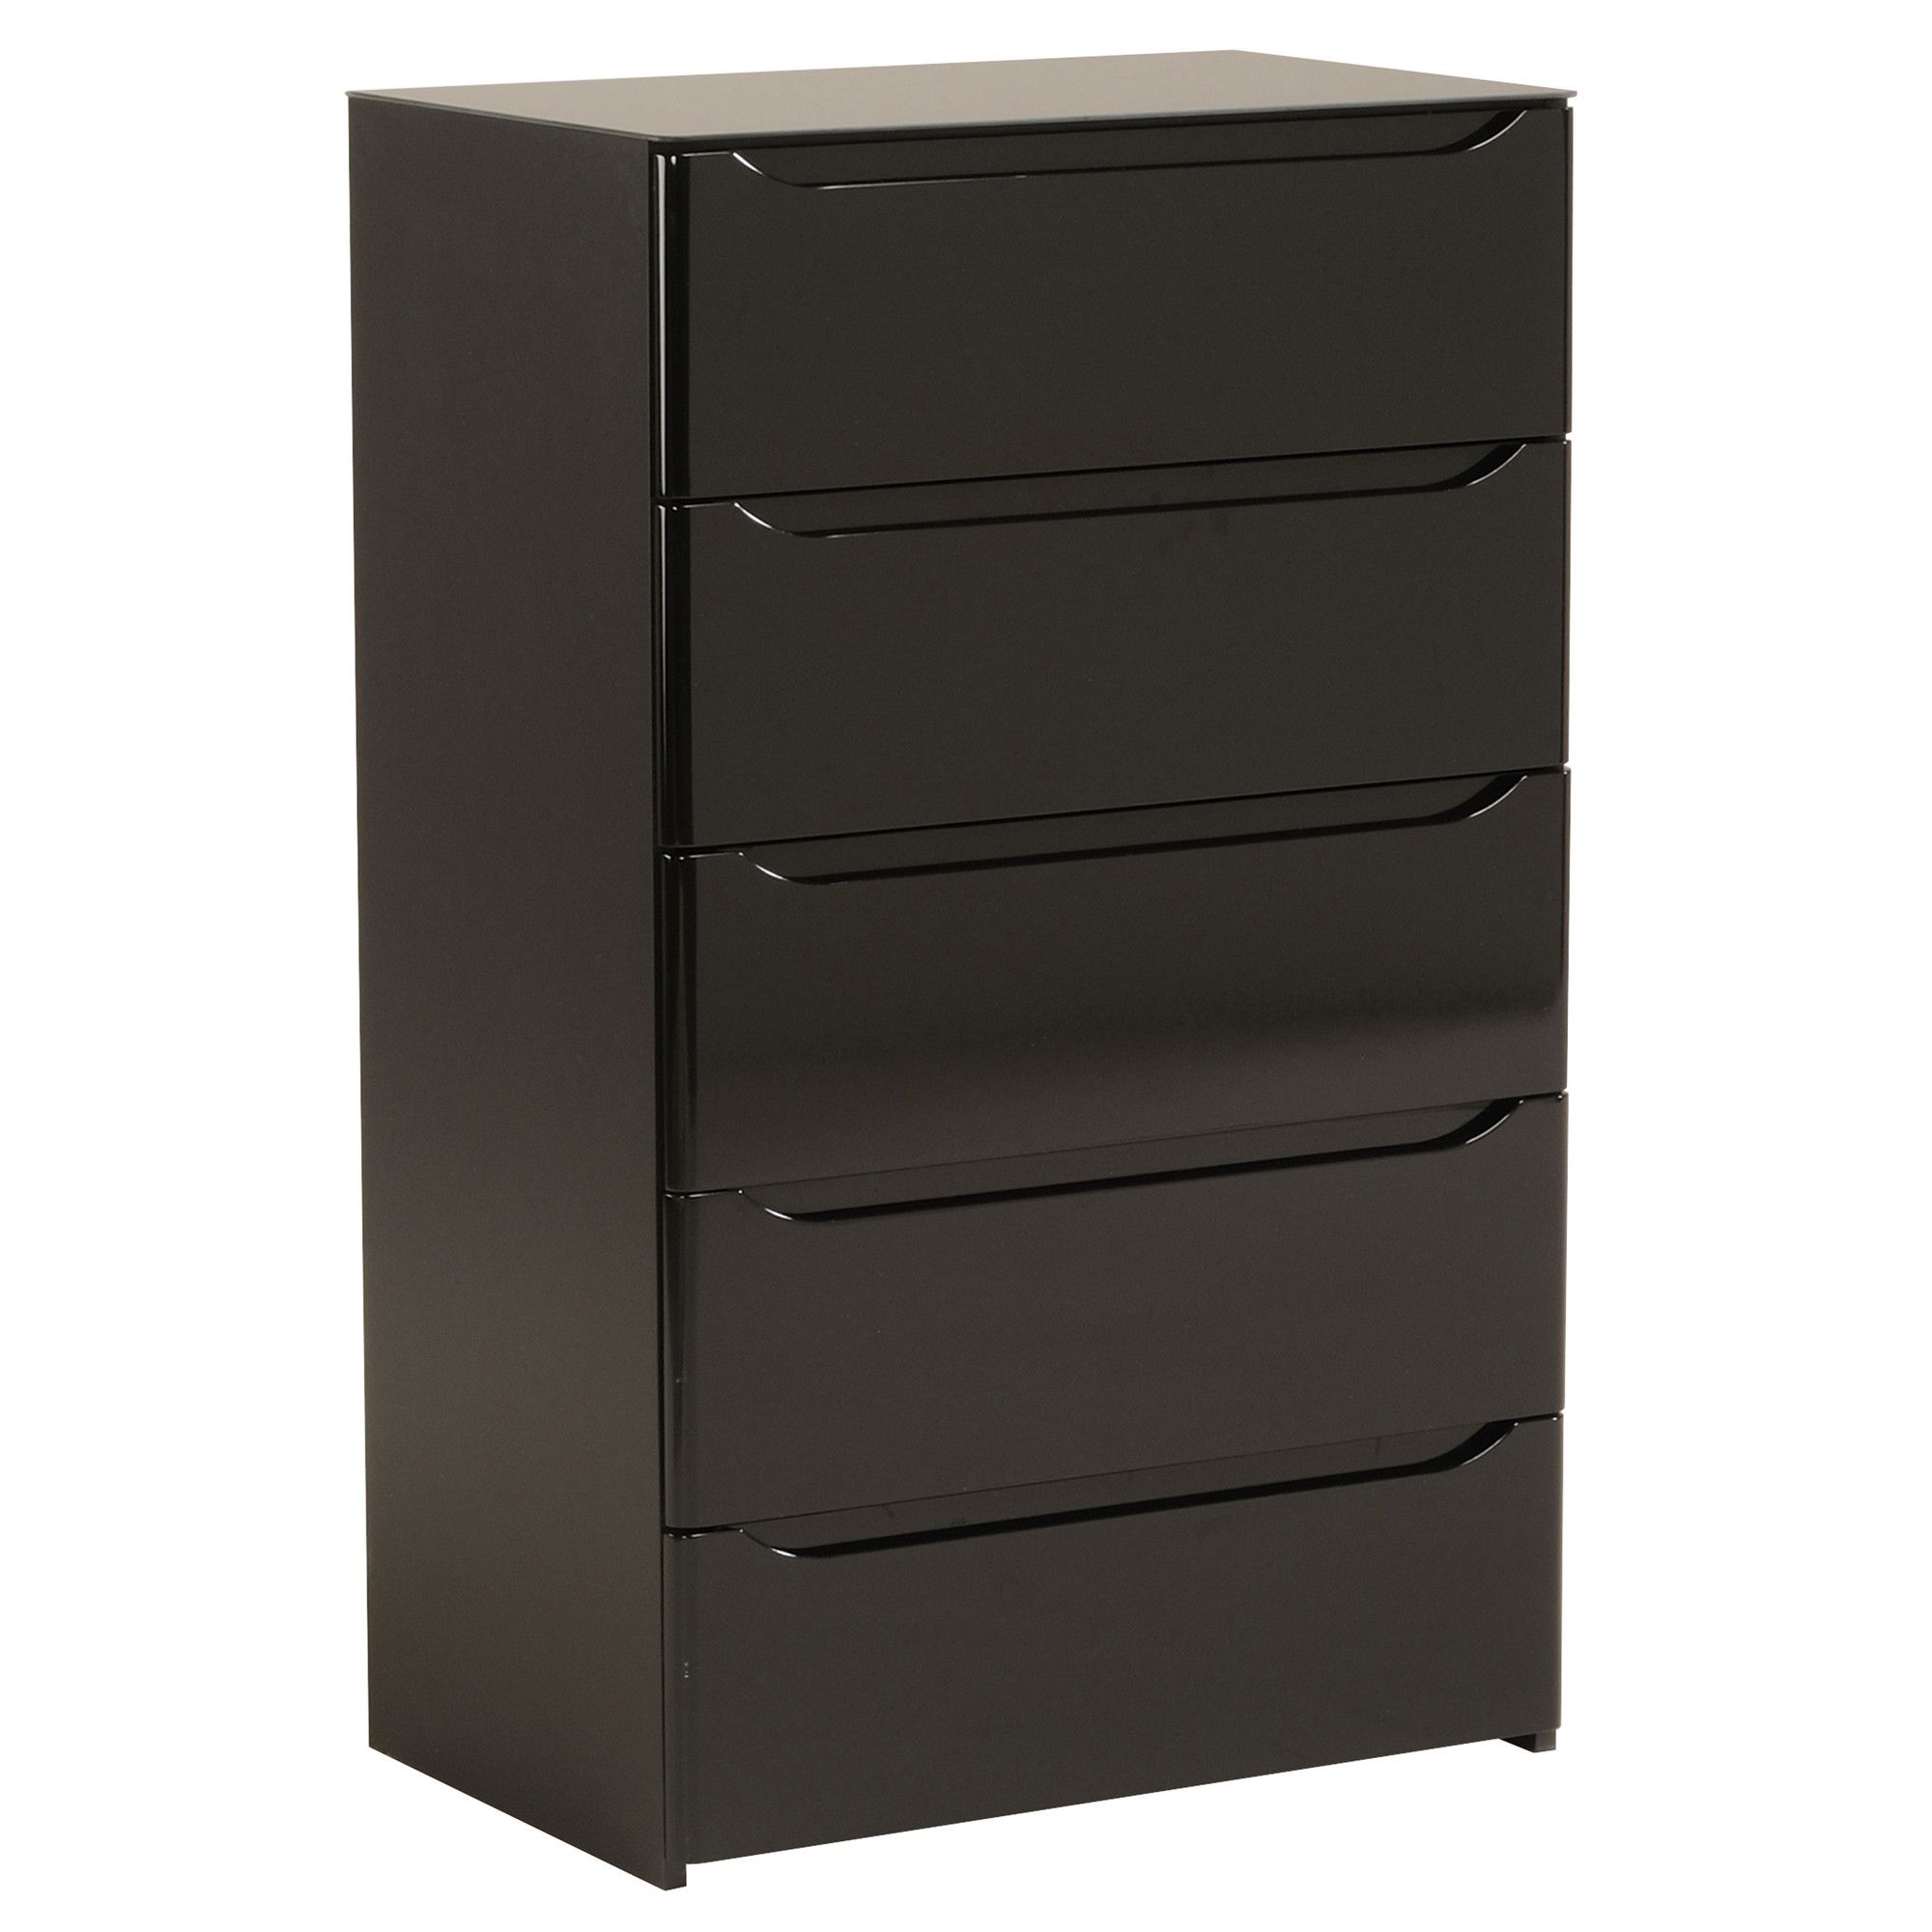 Parisot Ambyblack Chest of 5 Drawers at Tesco Direct